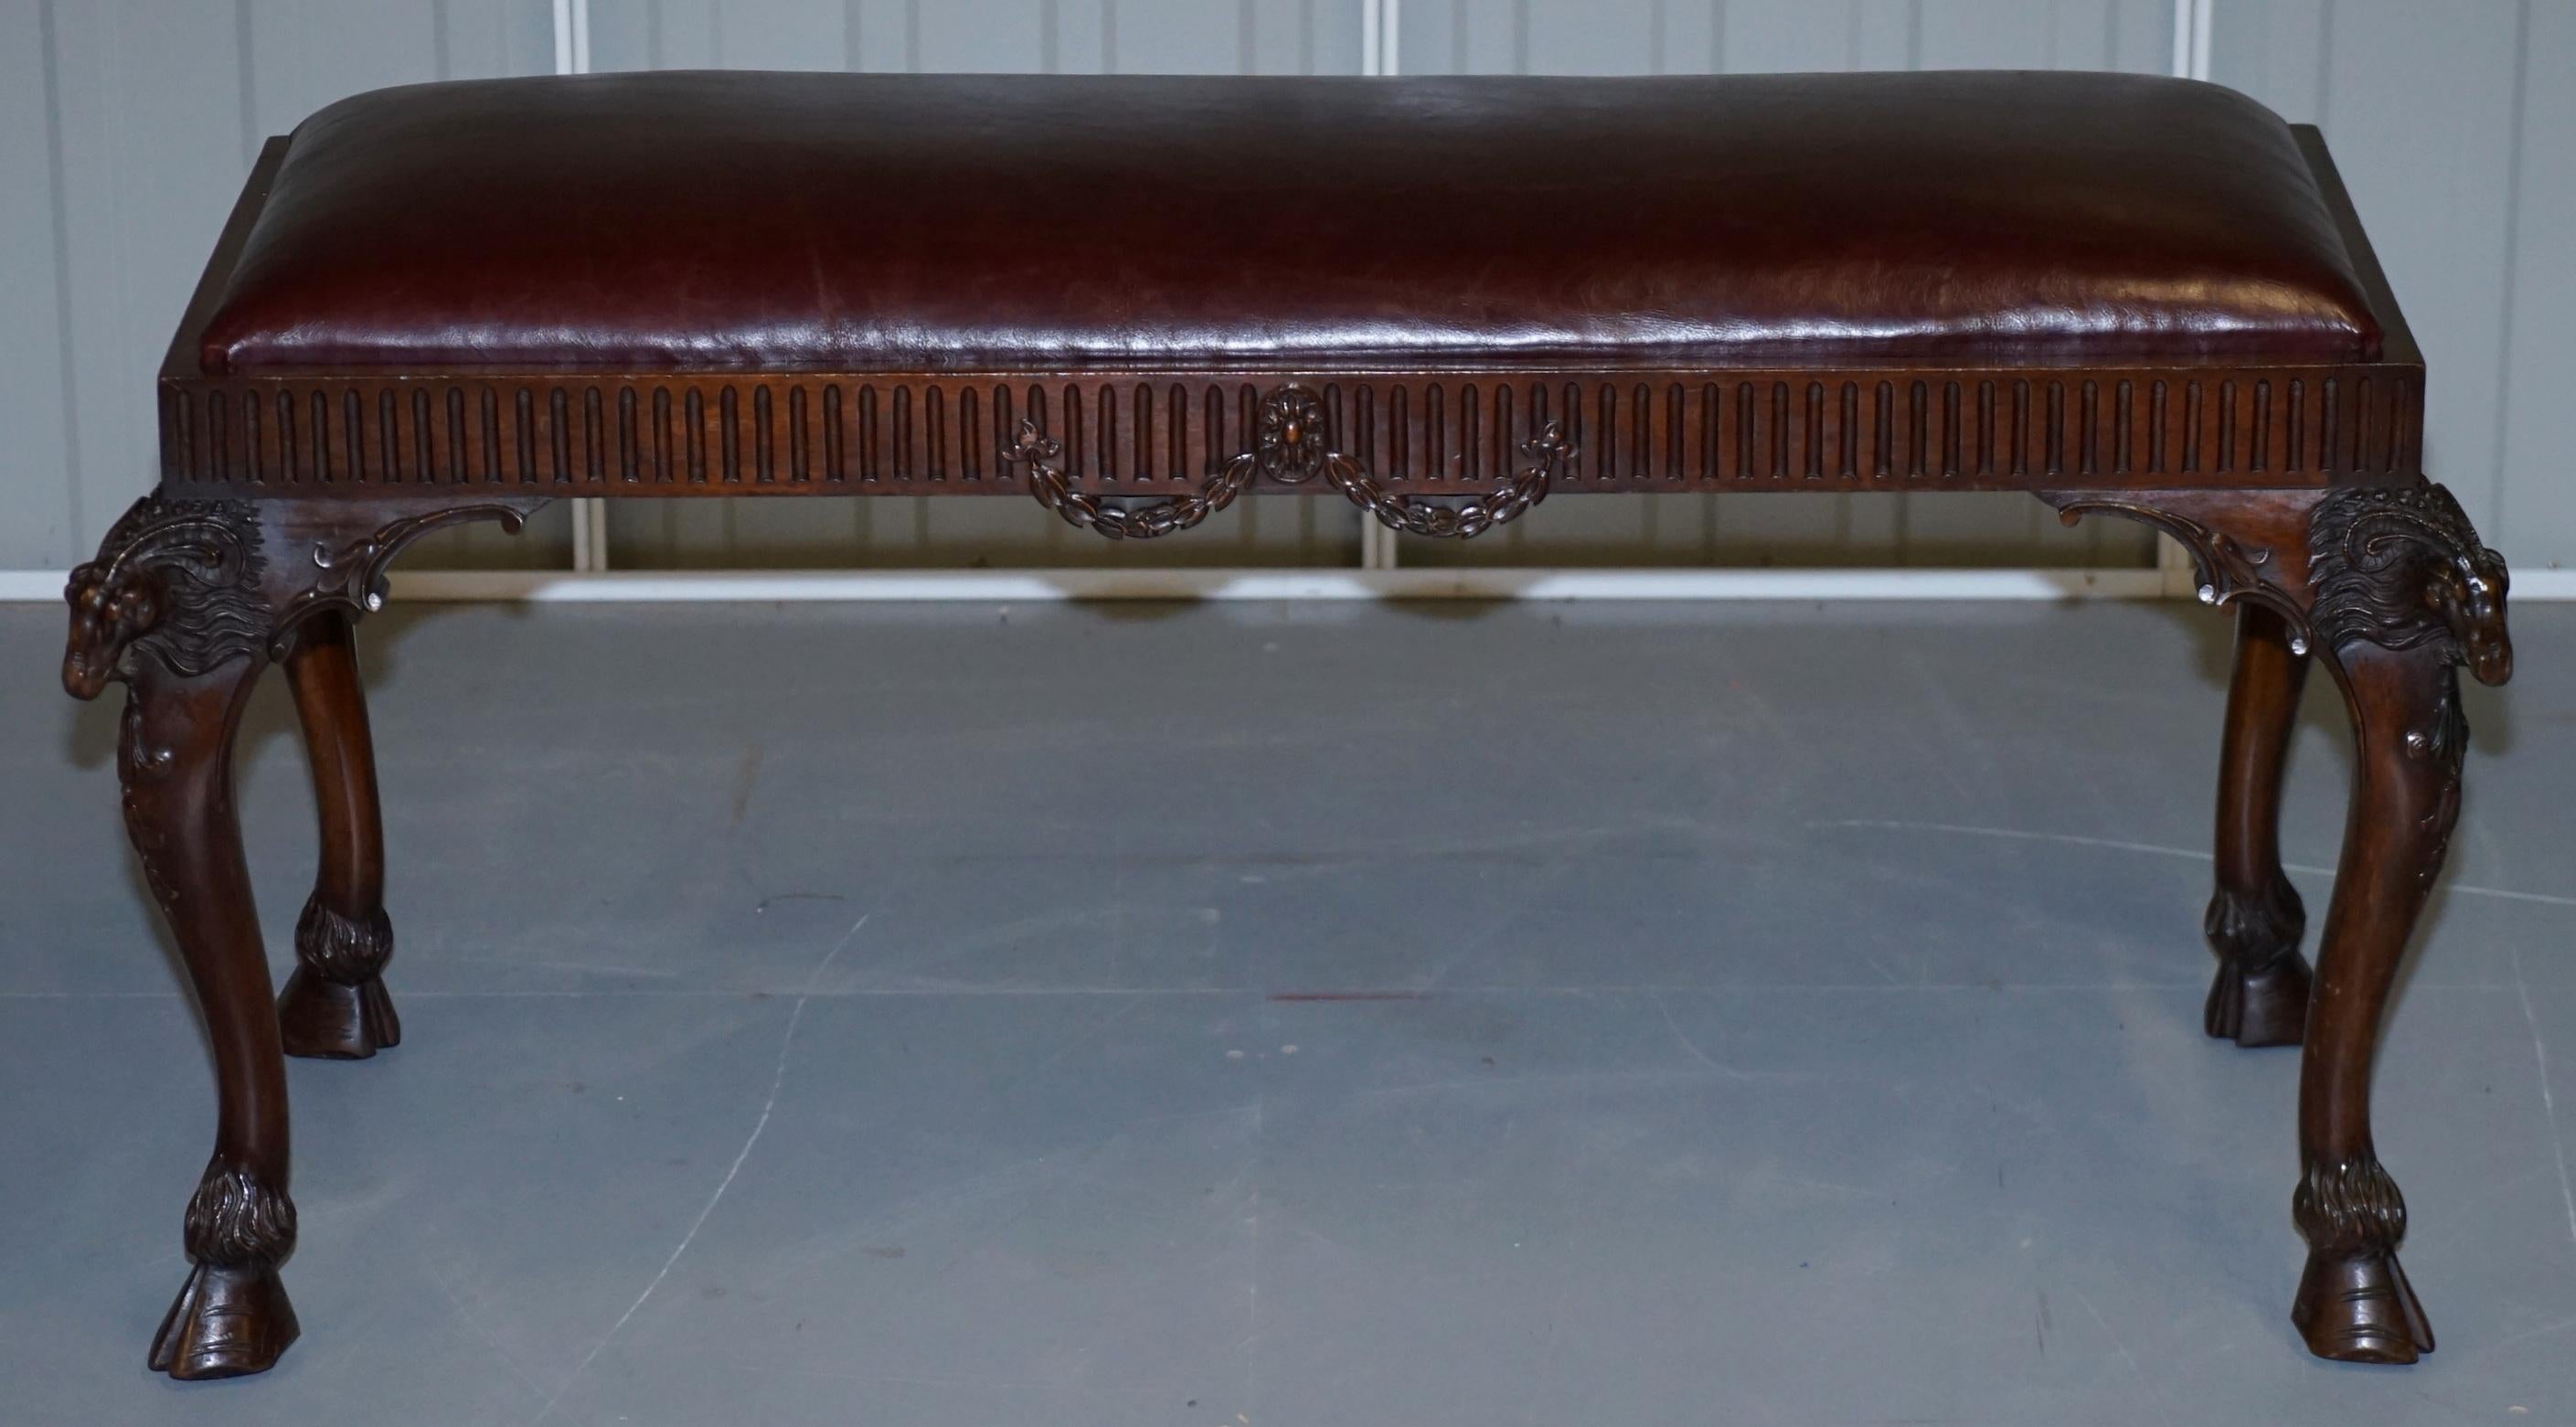 Wimbledon-Furniture

Wimbledon-Furniture is delighted to offer for sale this stunning lightly restored period French Renaissance Revival Rams head circa 19th century mahogany window seat with new heritage oxblood leather upholstery

Please note